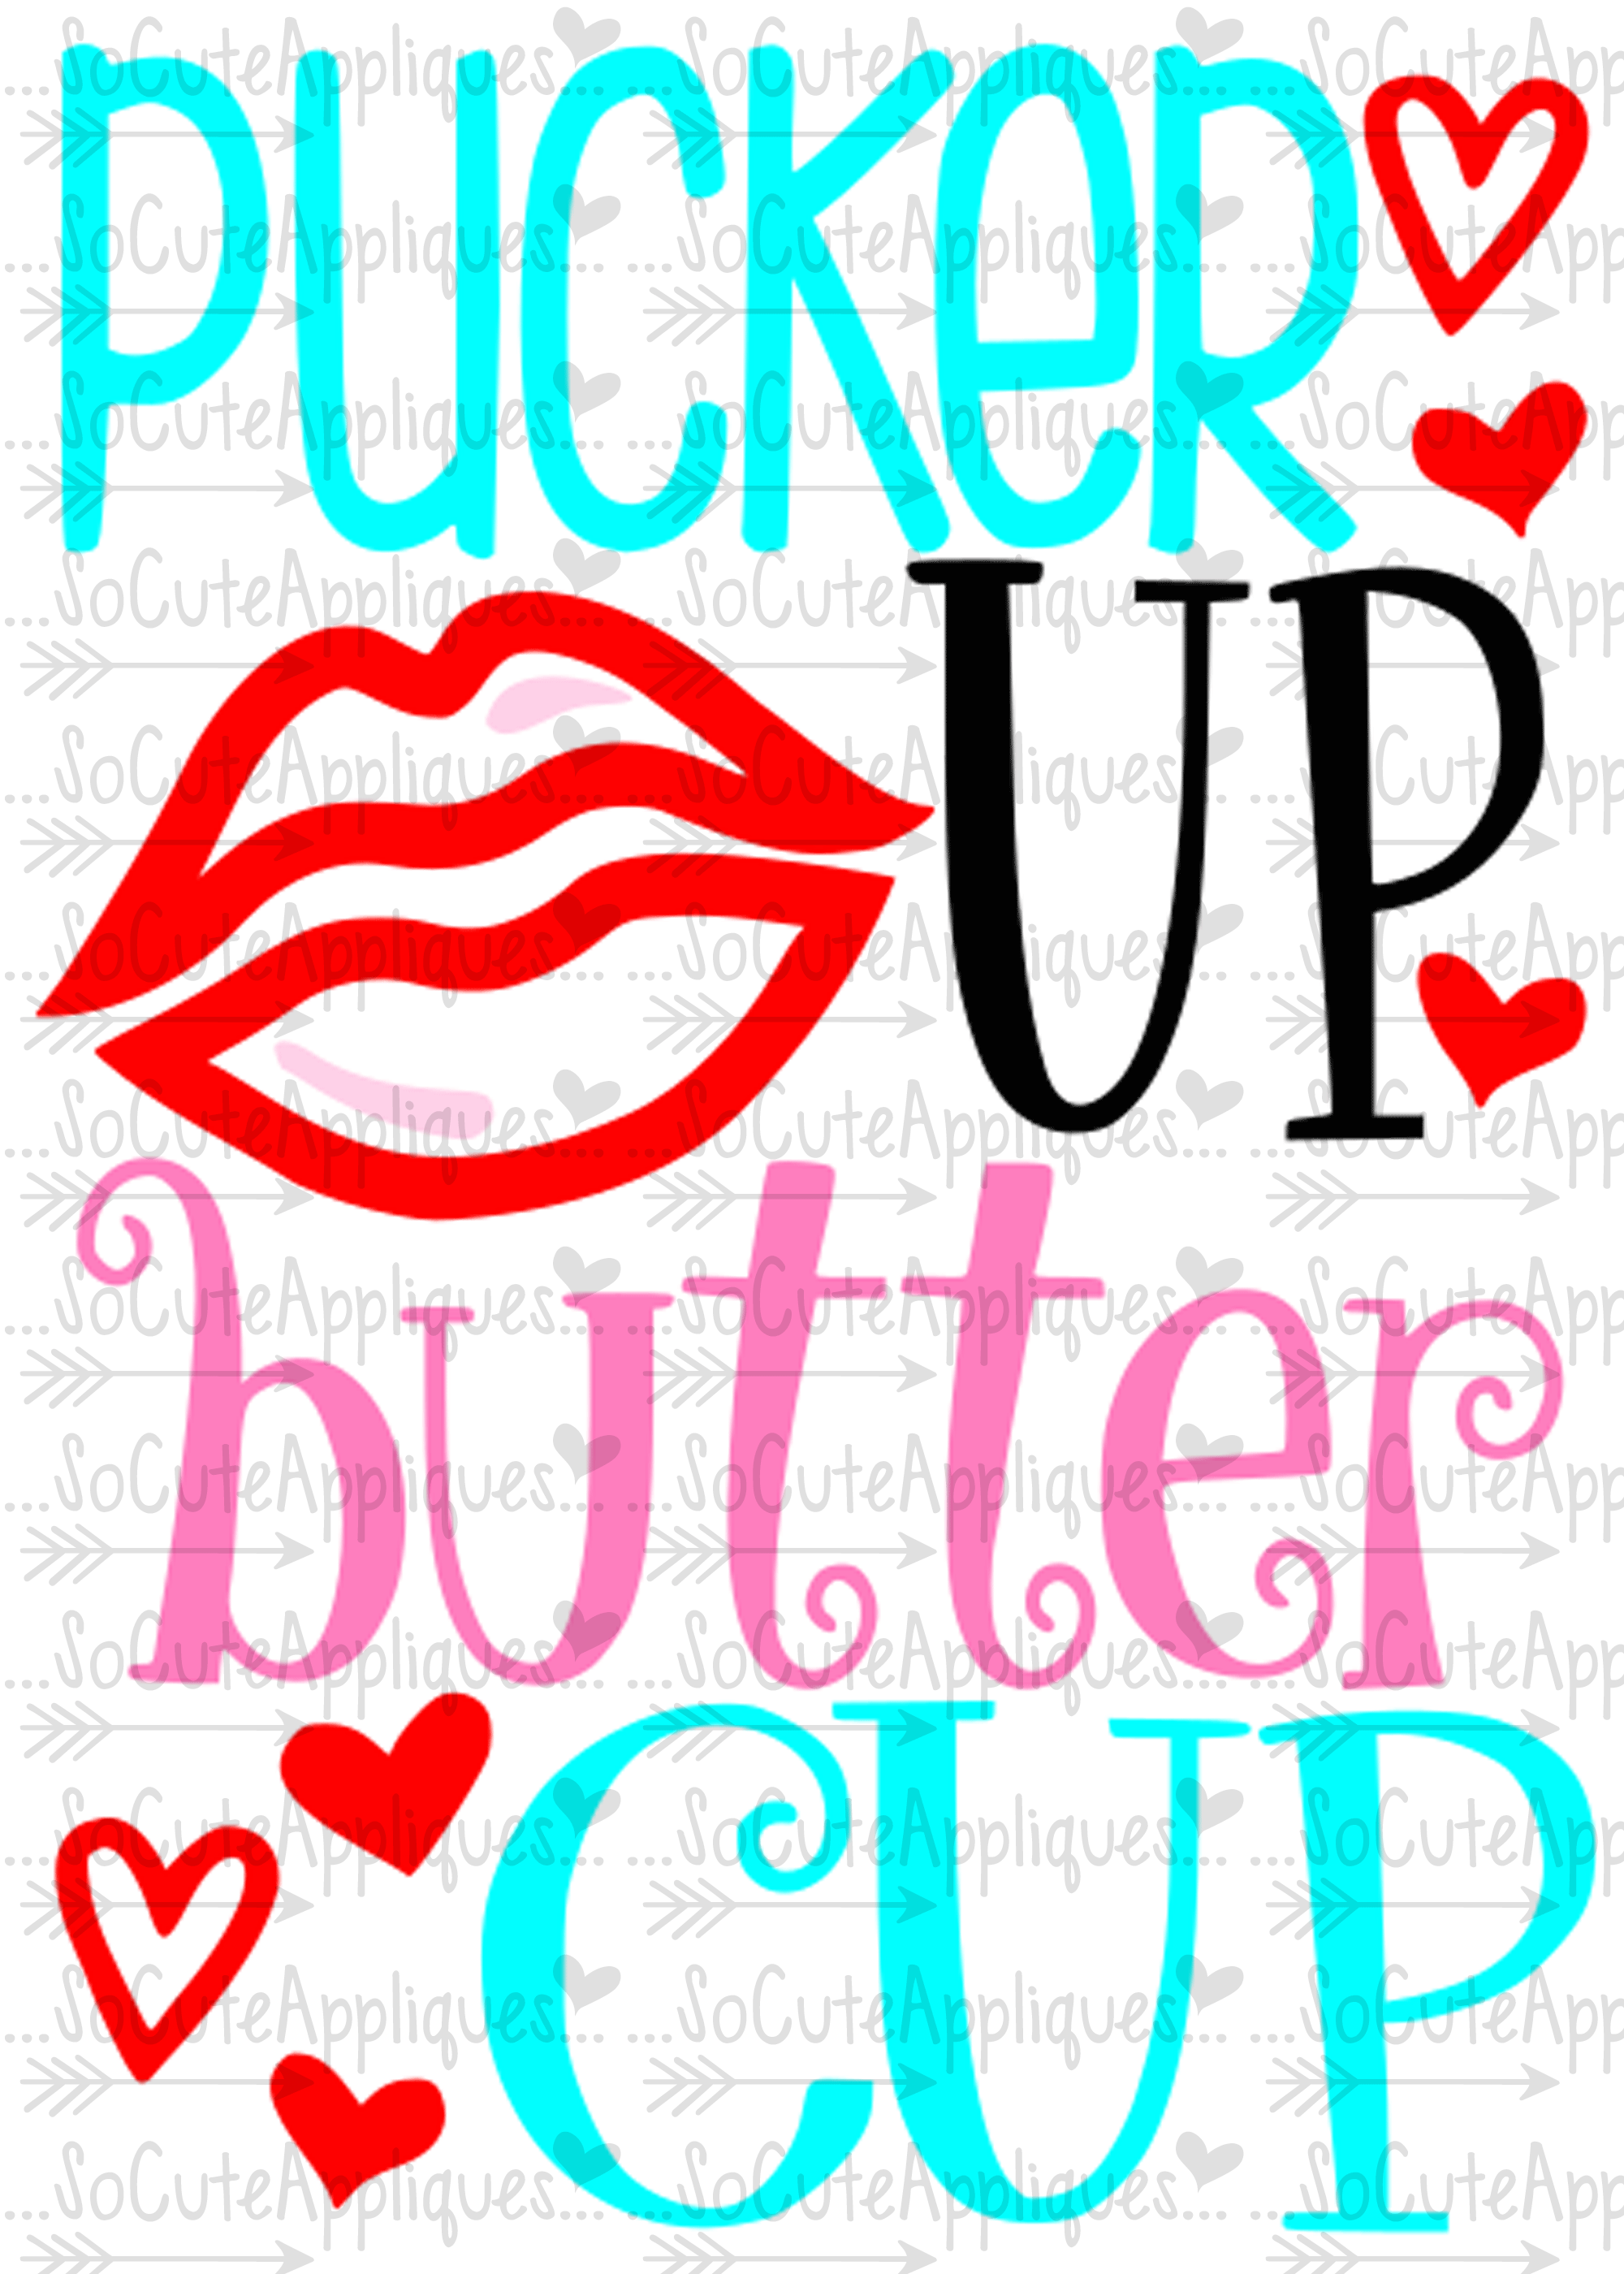 Buttercup svg #8, Download drawings